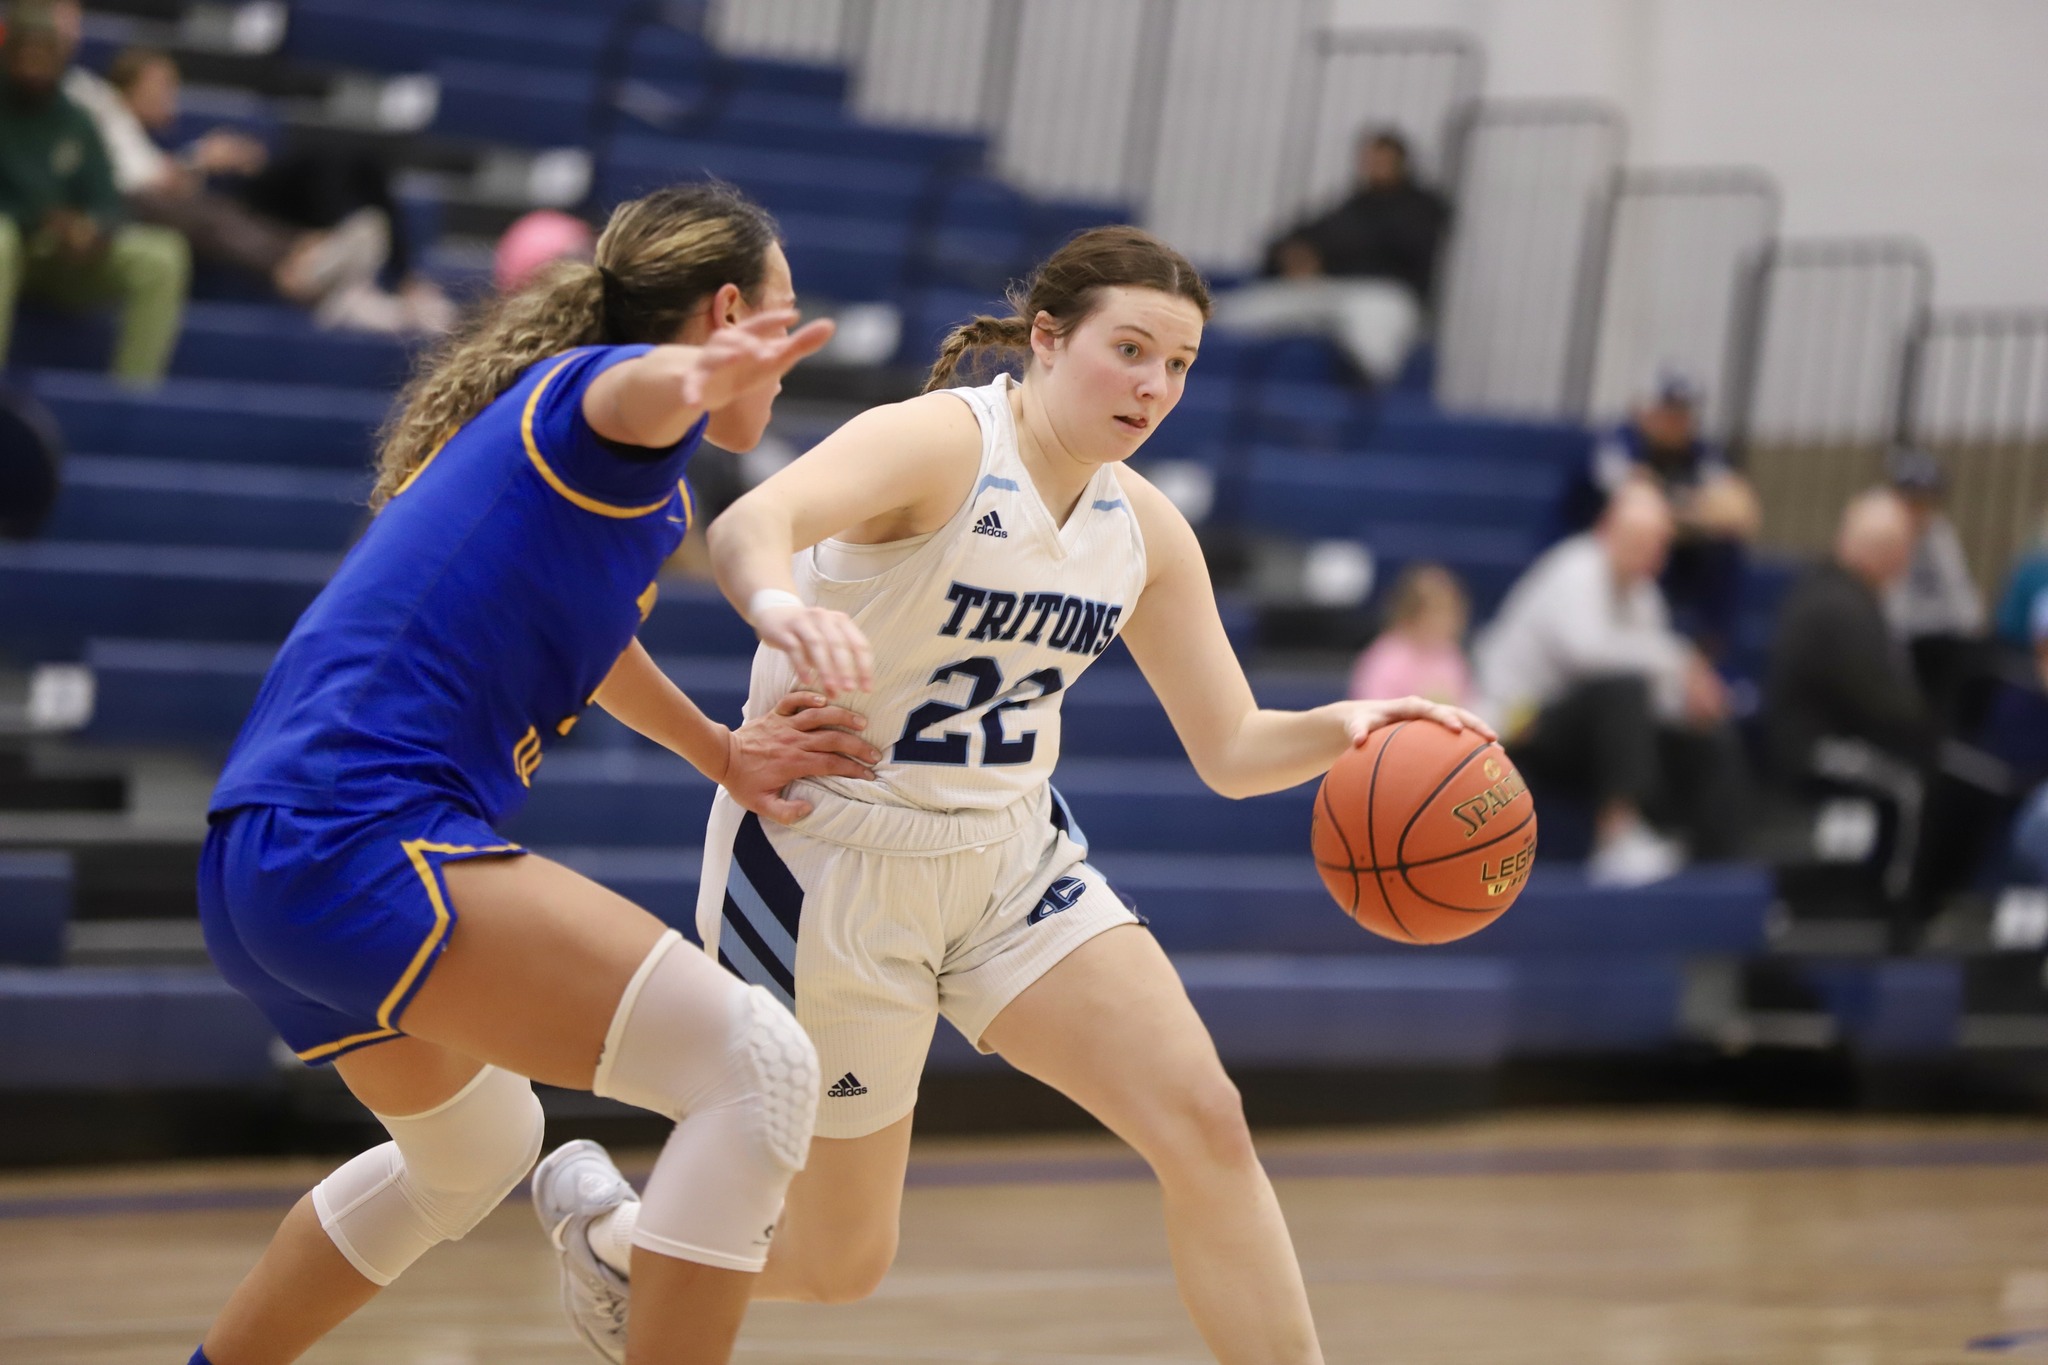 Womens basketball loses first game to NIACC 